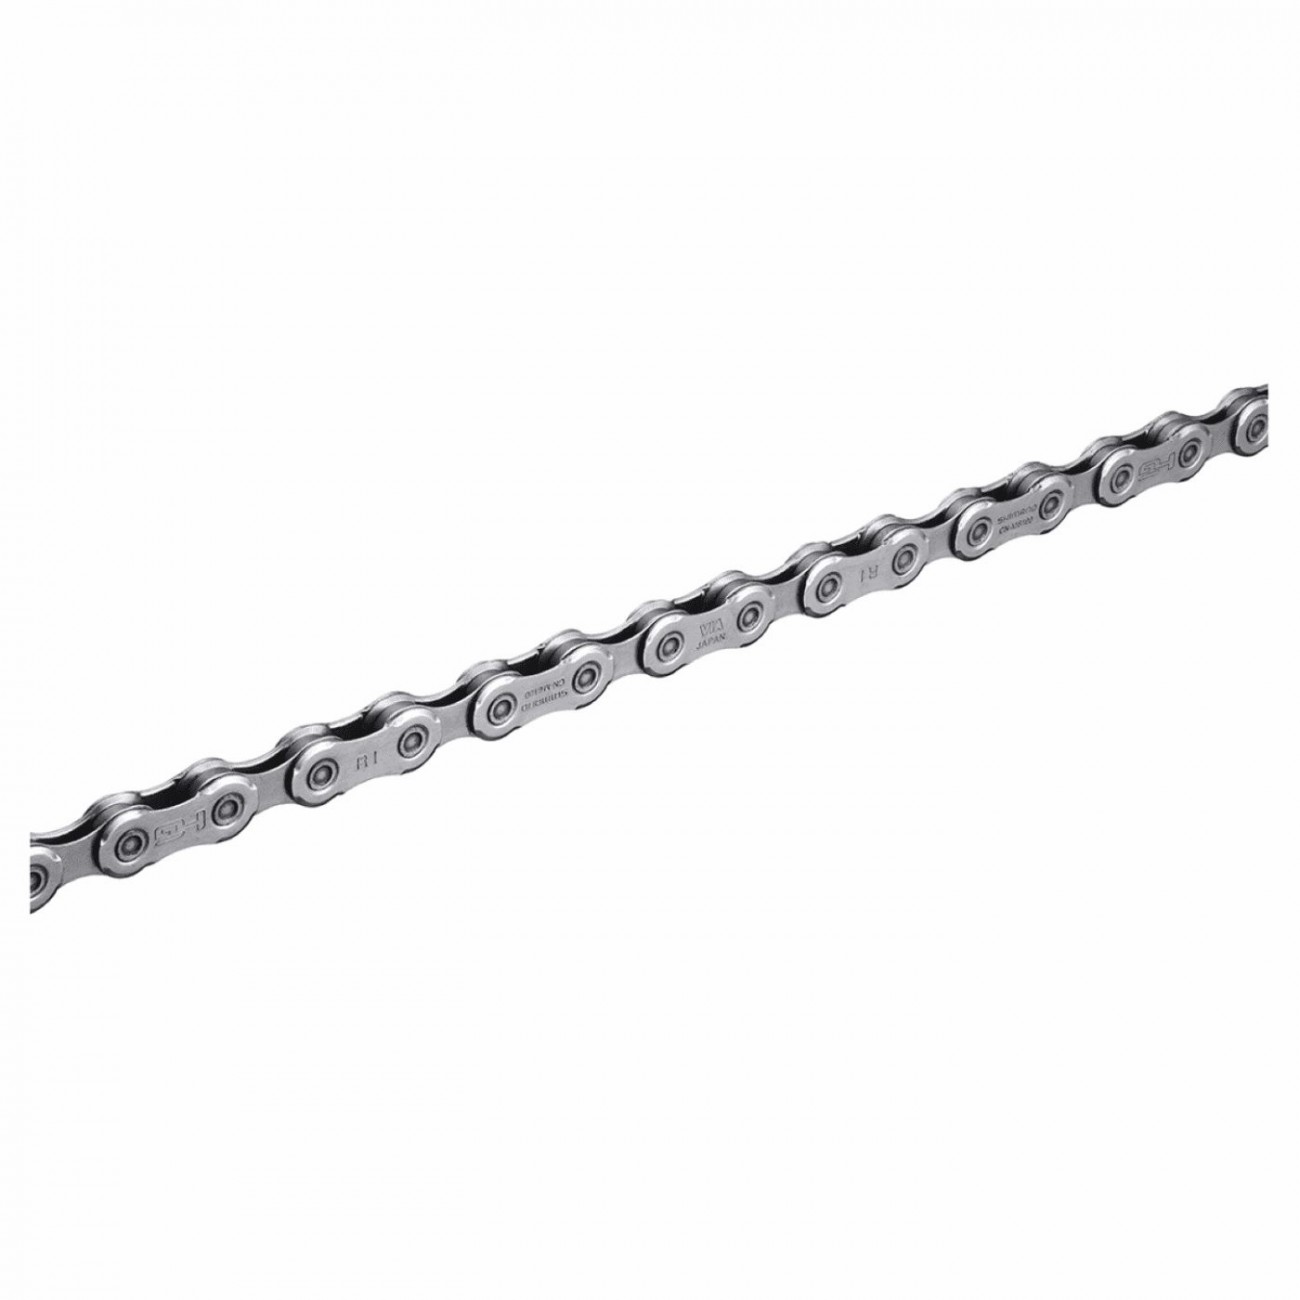 12v deore cn-m6100 quicklink chain 126 links - 1